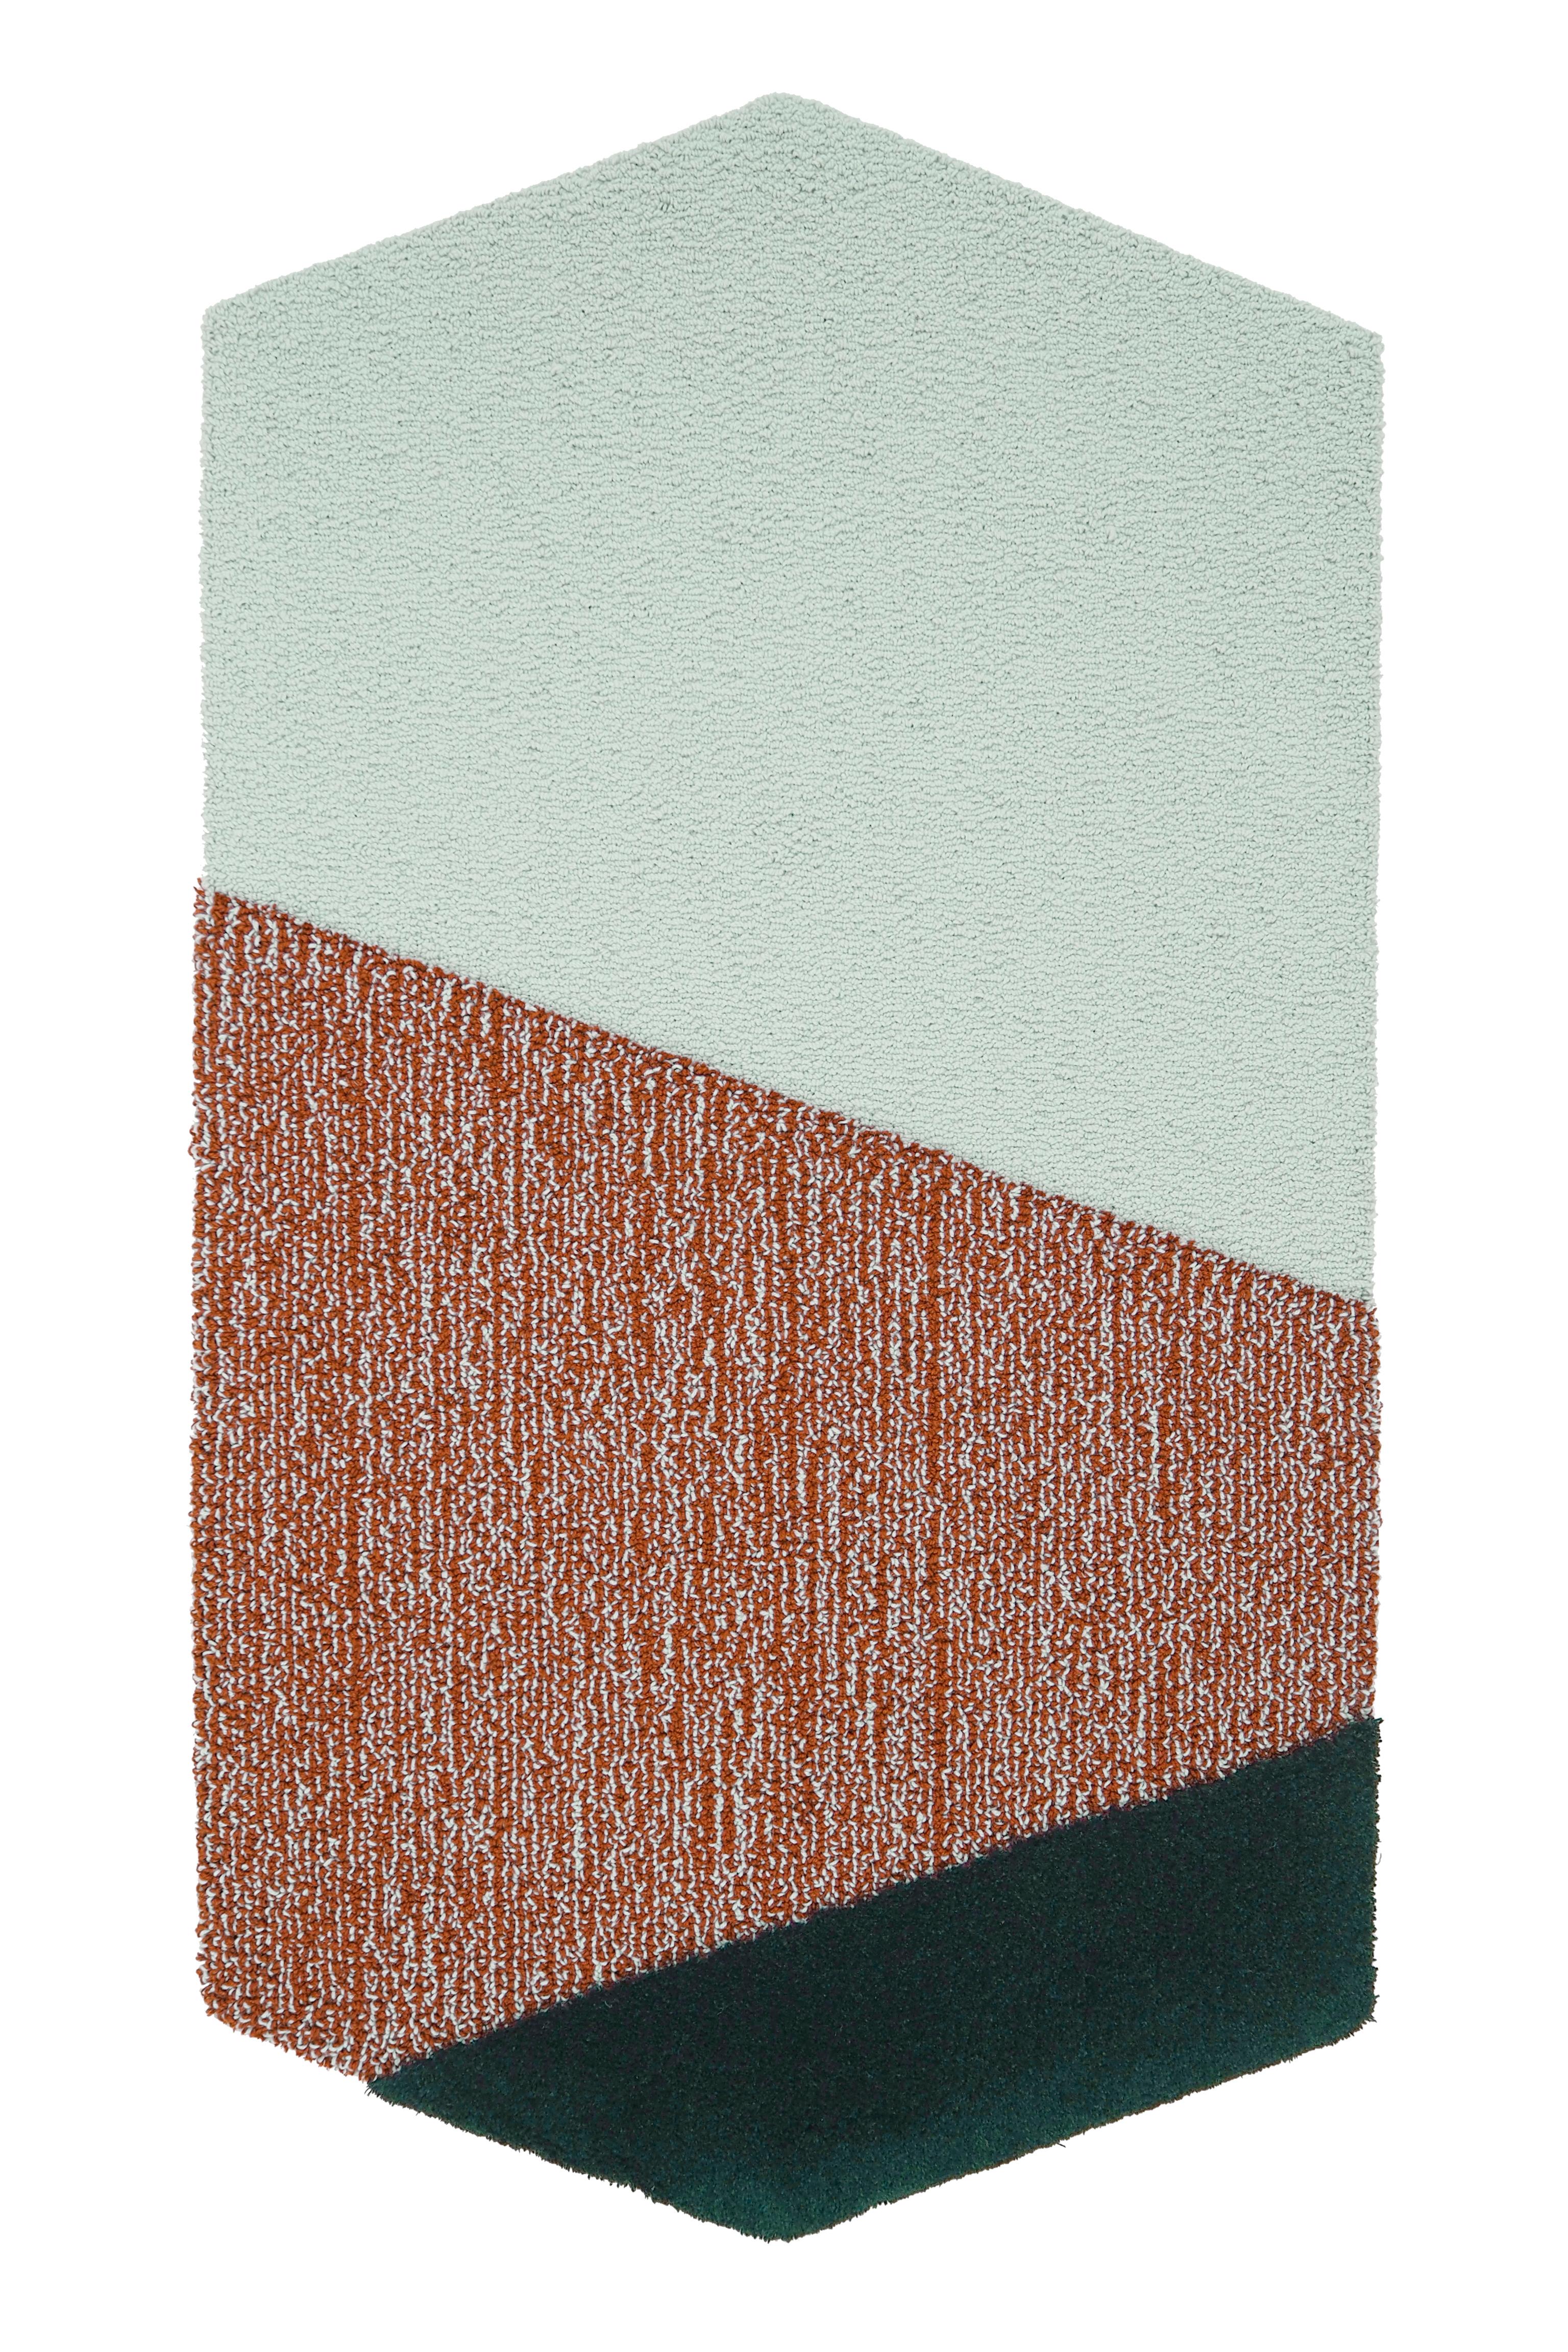 Machine-Made OCI Triptych M, Composition of 3 Rugs 100% Wool / Green/Brick by Portego For Sale